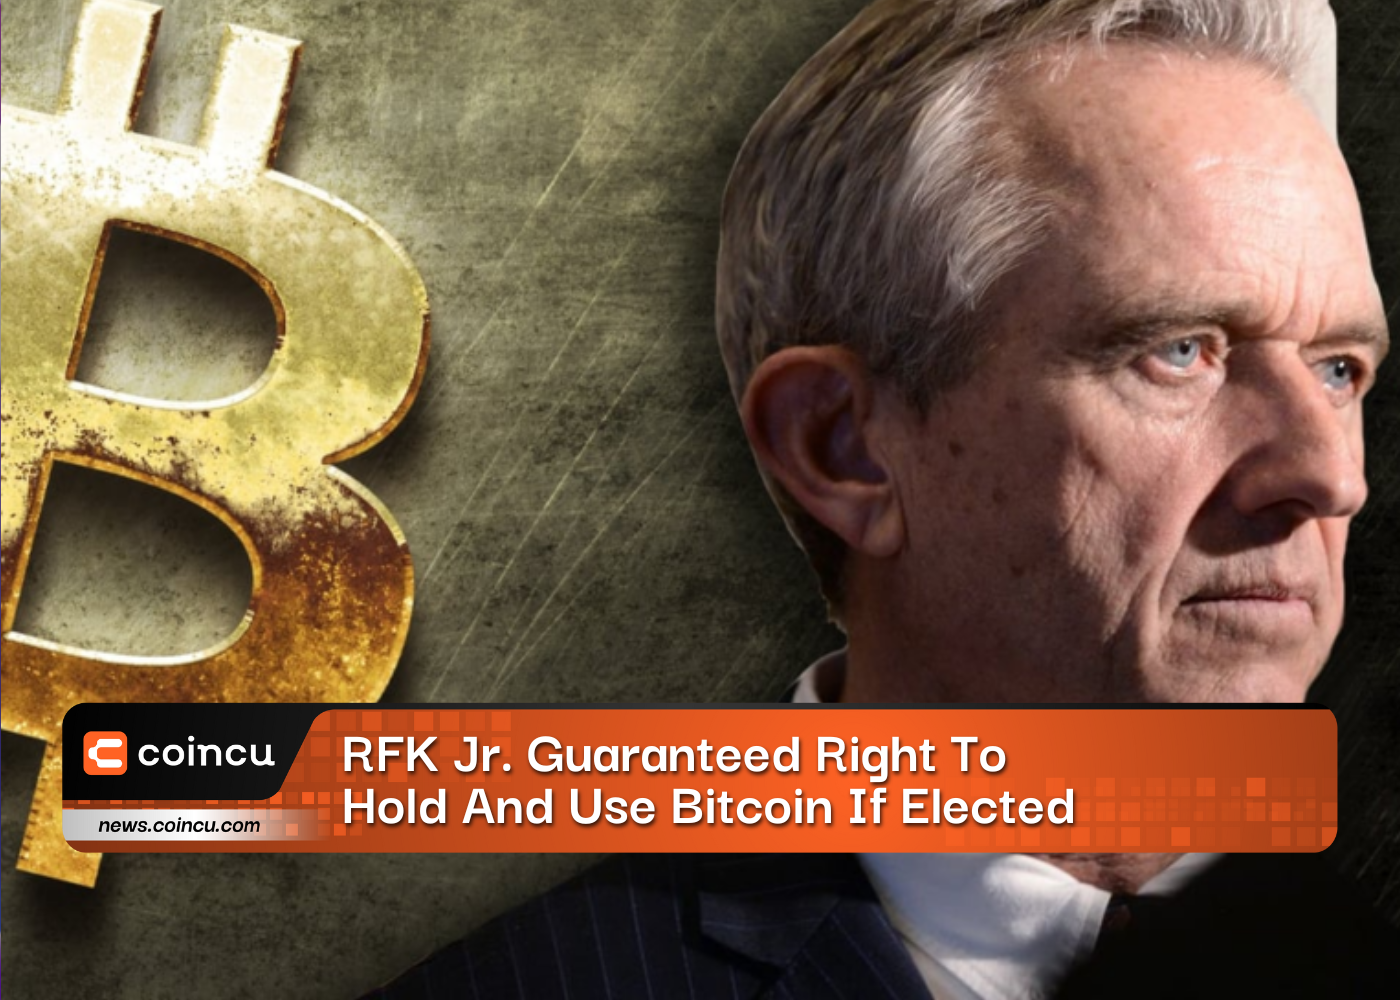 RFK Jr. Guaranteed Right To Hold And Use Bitcoin If Elected